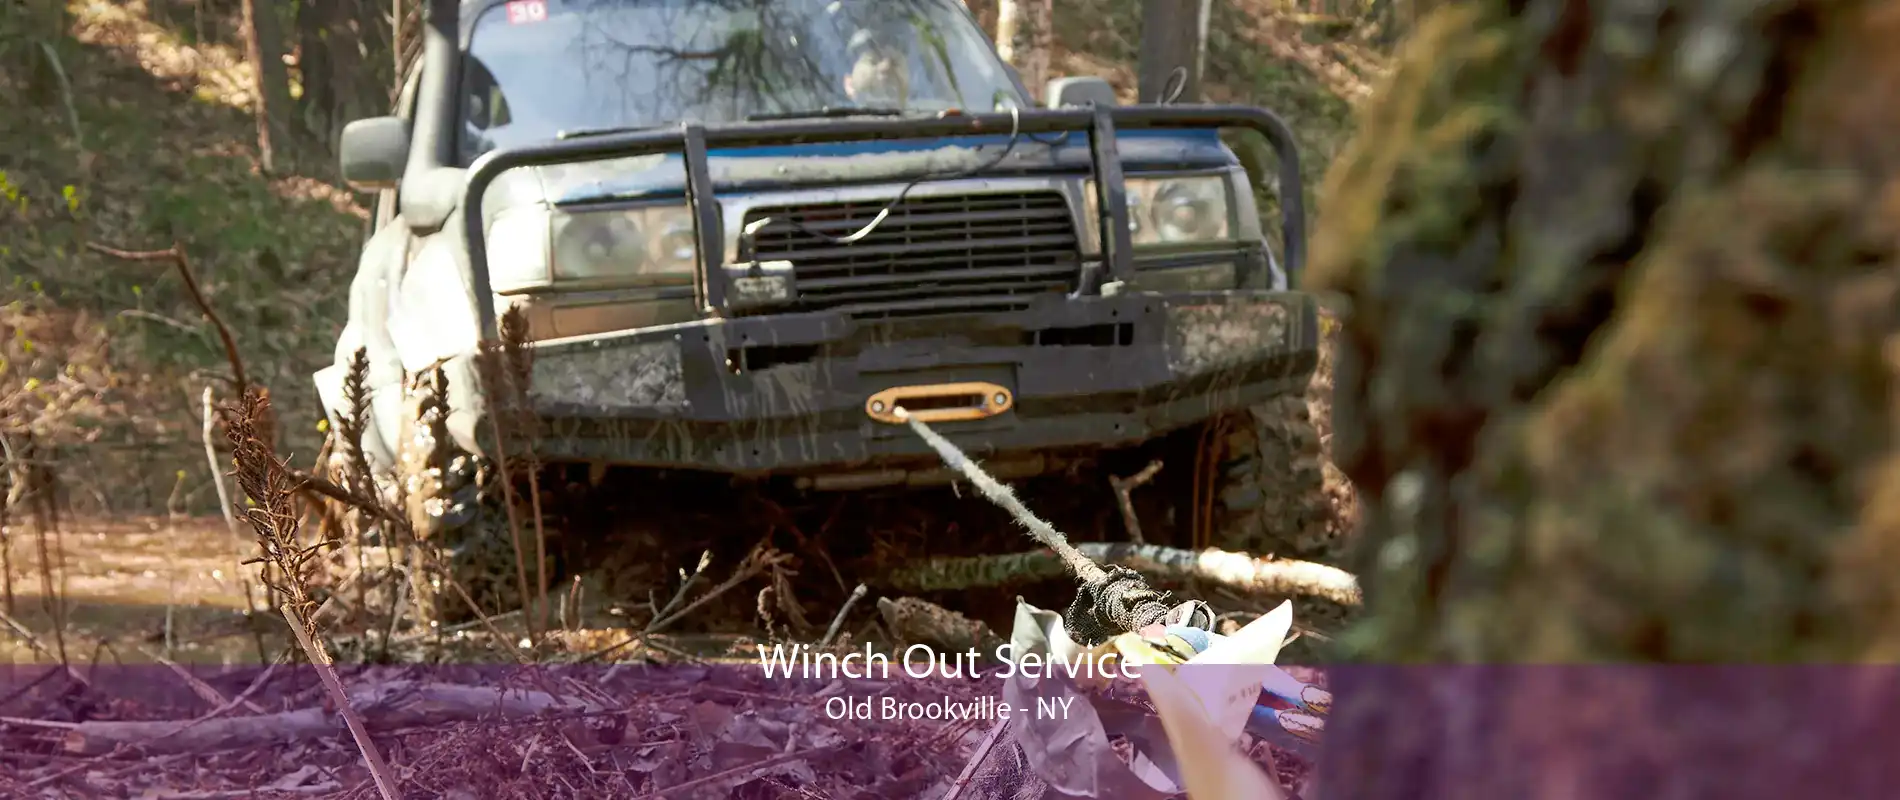 Winch Out Service Old Brookville - NY